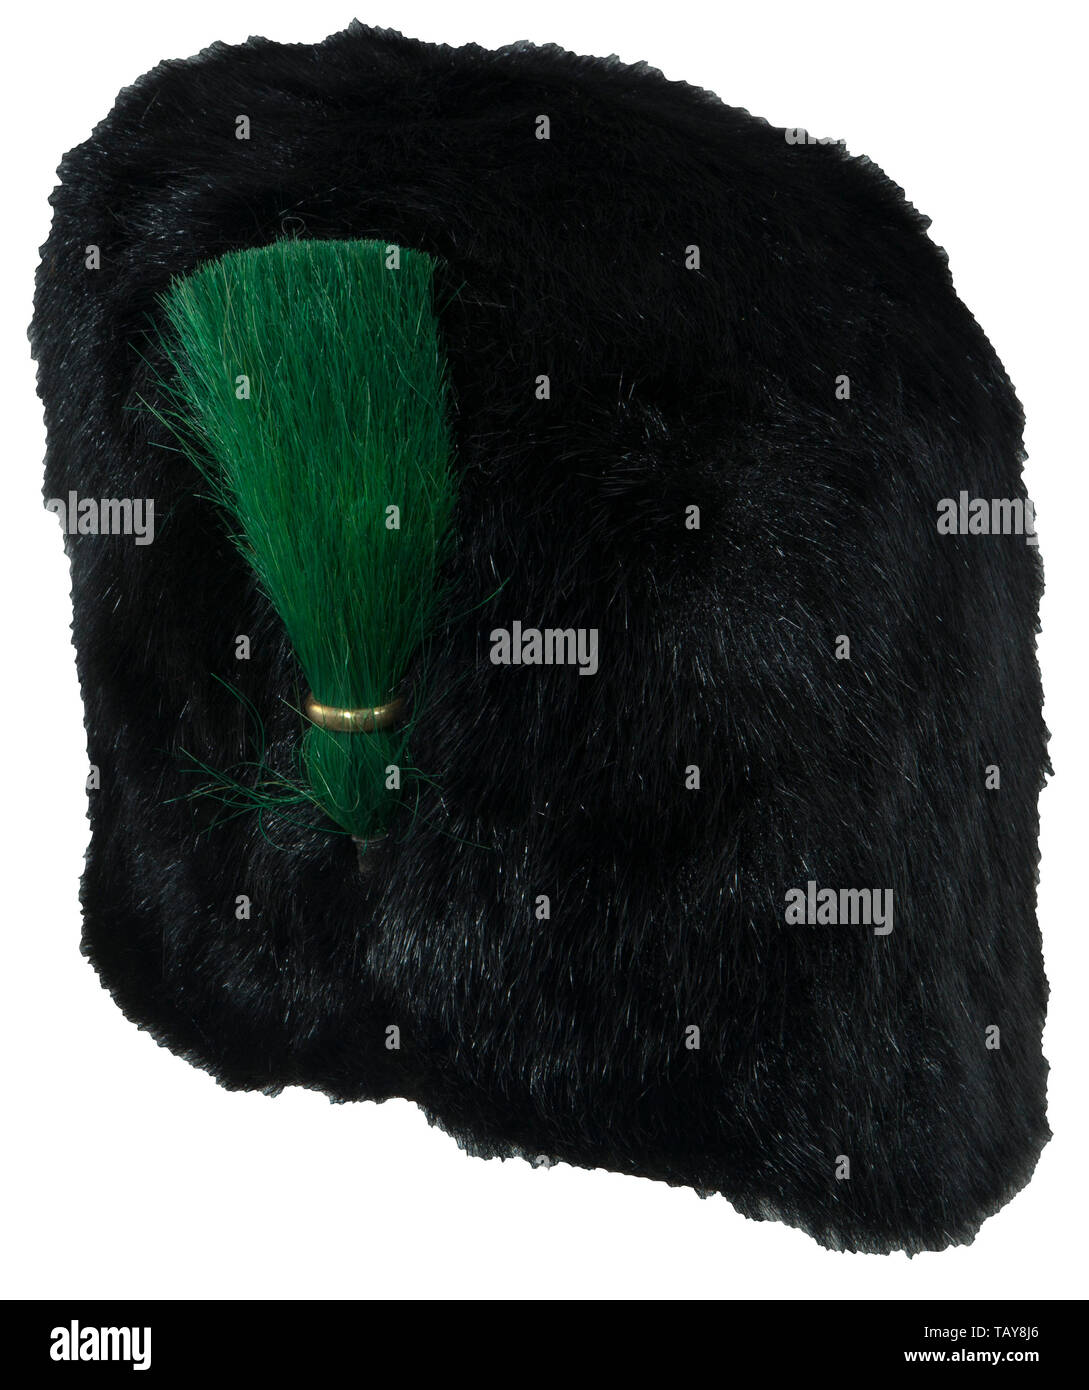 A British skin cap, Black leather body, long black bear fur, leather lined gold chinstraps, worn leather liner, green bush with gold ring, size 6 3/4, interior with maker's mark 'Hobson and Sons London', dated 1914. USA-lot. historic, historical 20th century, Additional-Rights-Clearance-Info-Not-Available Stock Photo